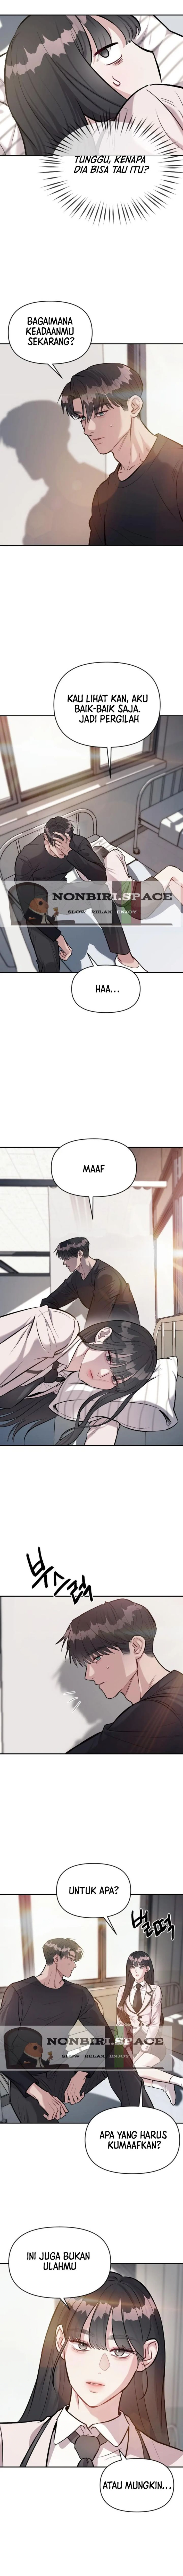 Undercover! Chaebol High School Chapter 15